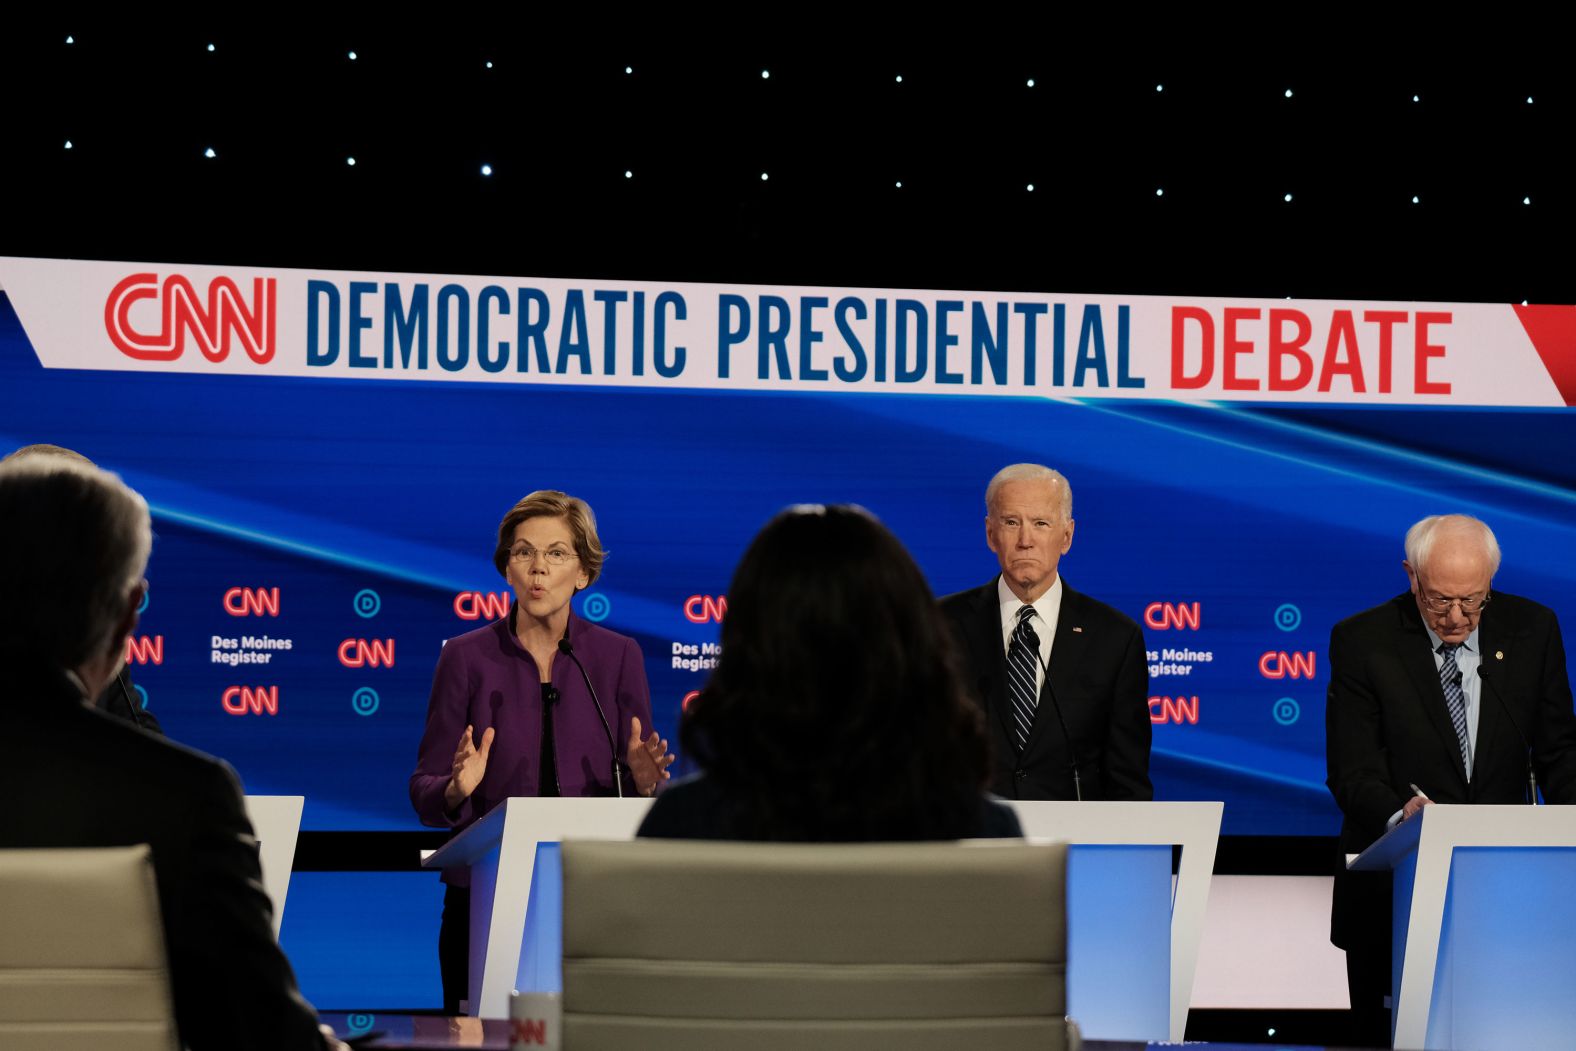 Warren answers a question during the first half of the debate.